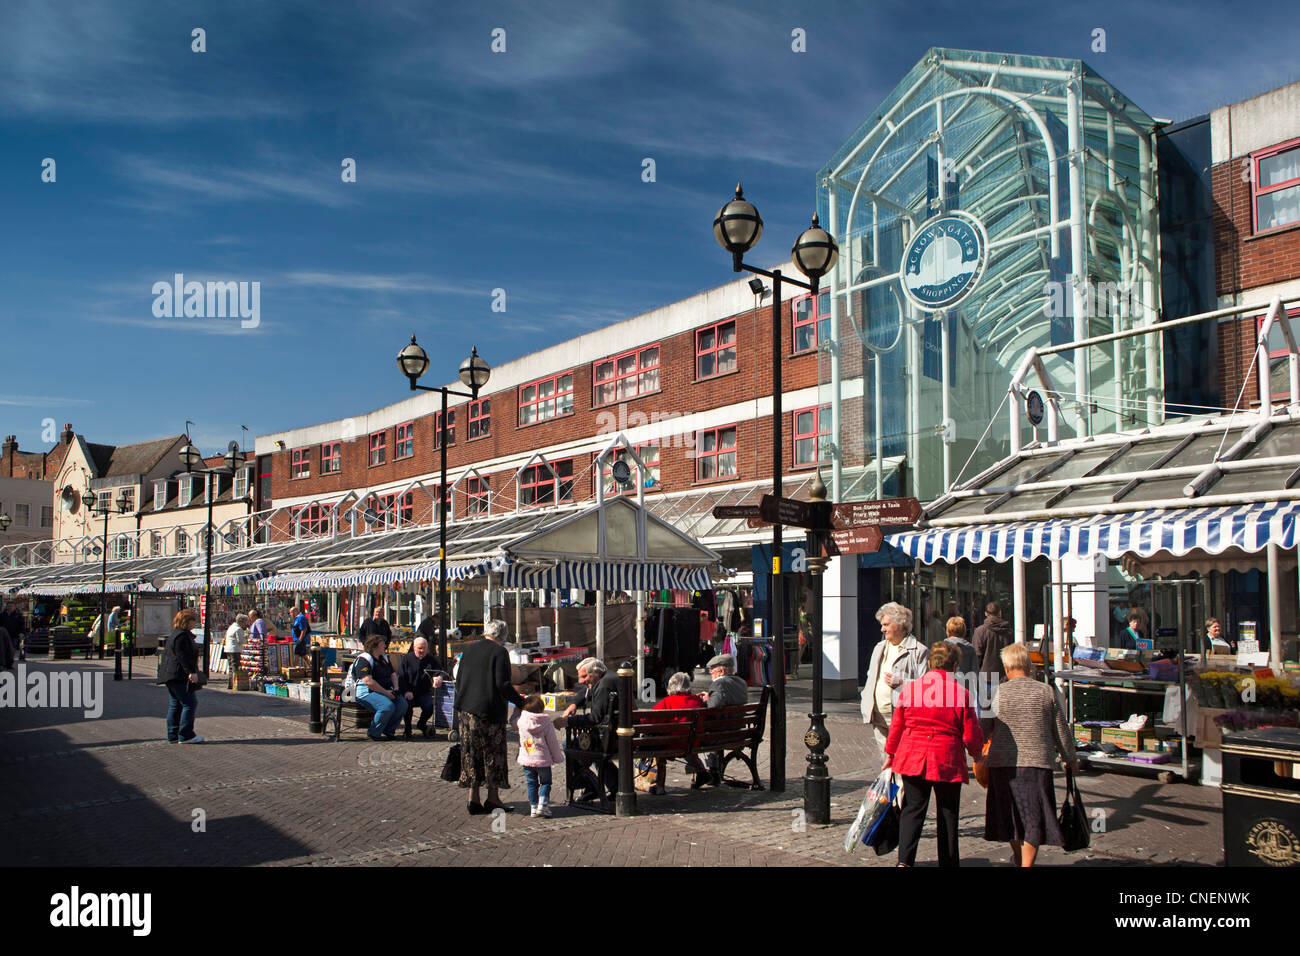 UK, England, Worcestershire, Worcester, Crowngate shopping development overlooking the Market Place Stock Photo